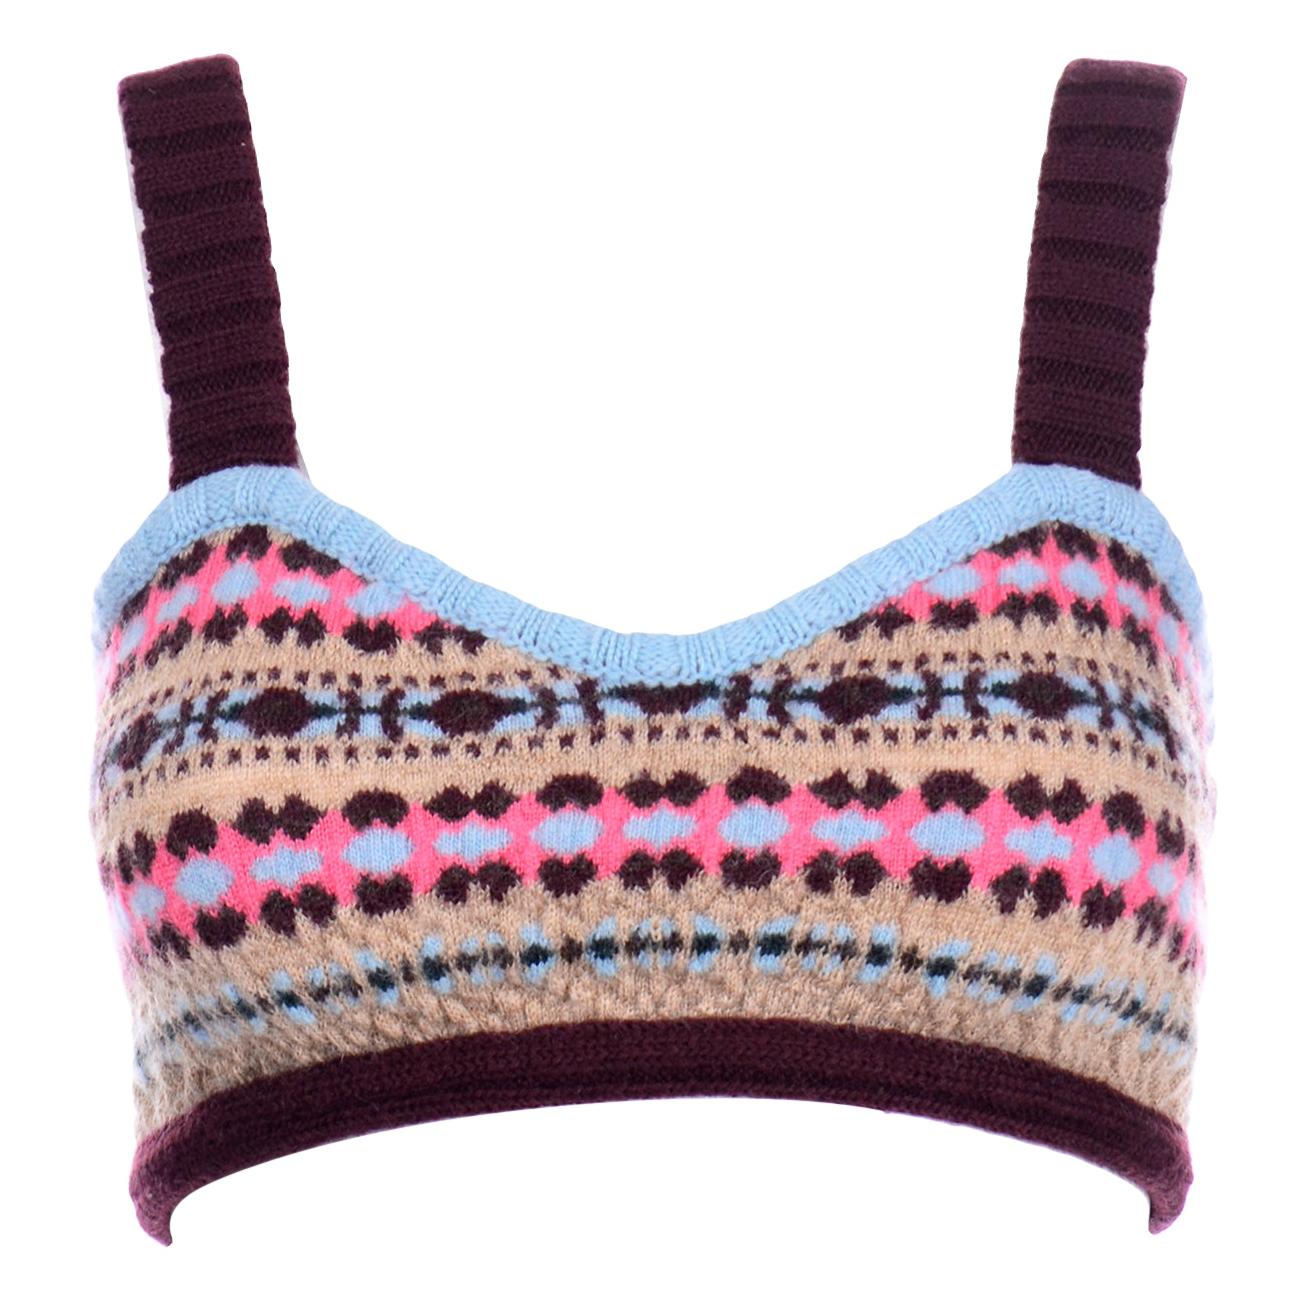 Valentino Blue Brown Pink Fair Isle Knit Bralette Crop Top Deadstock New W Tags For Sale